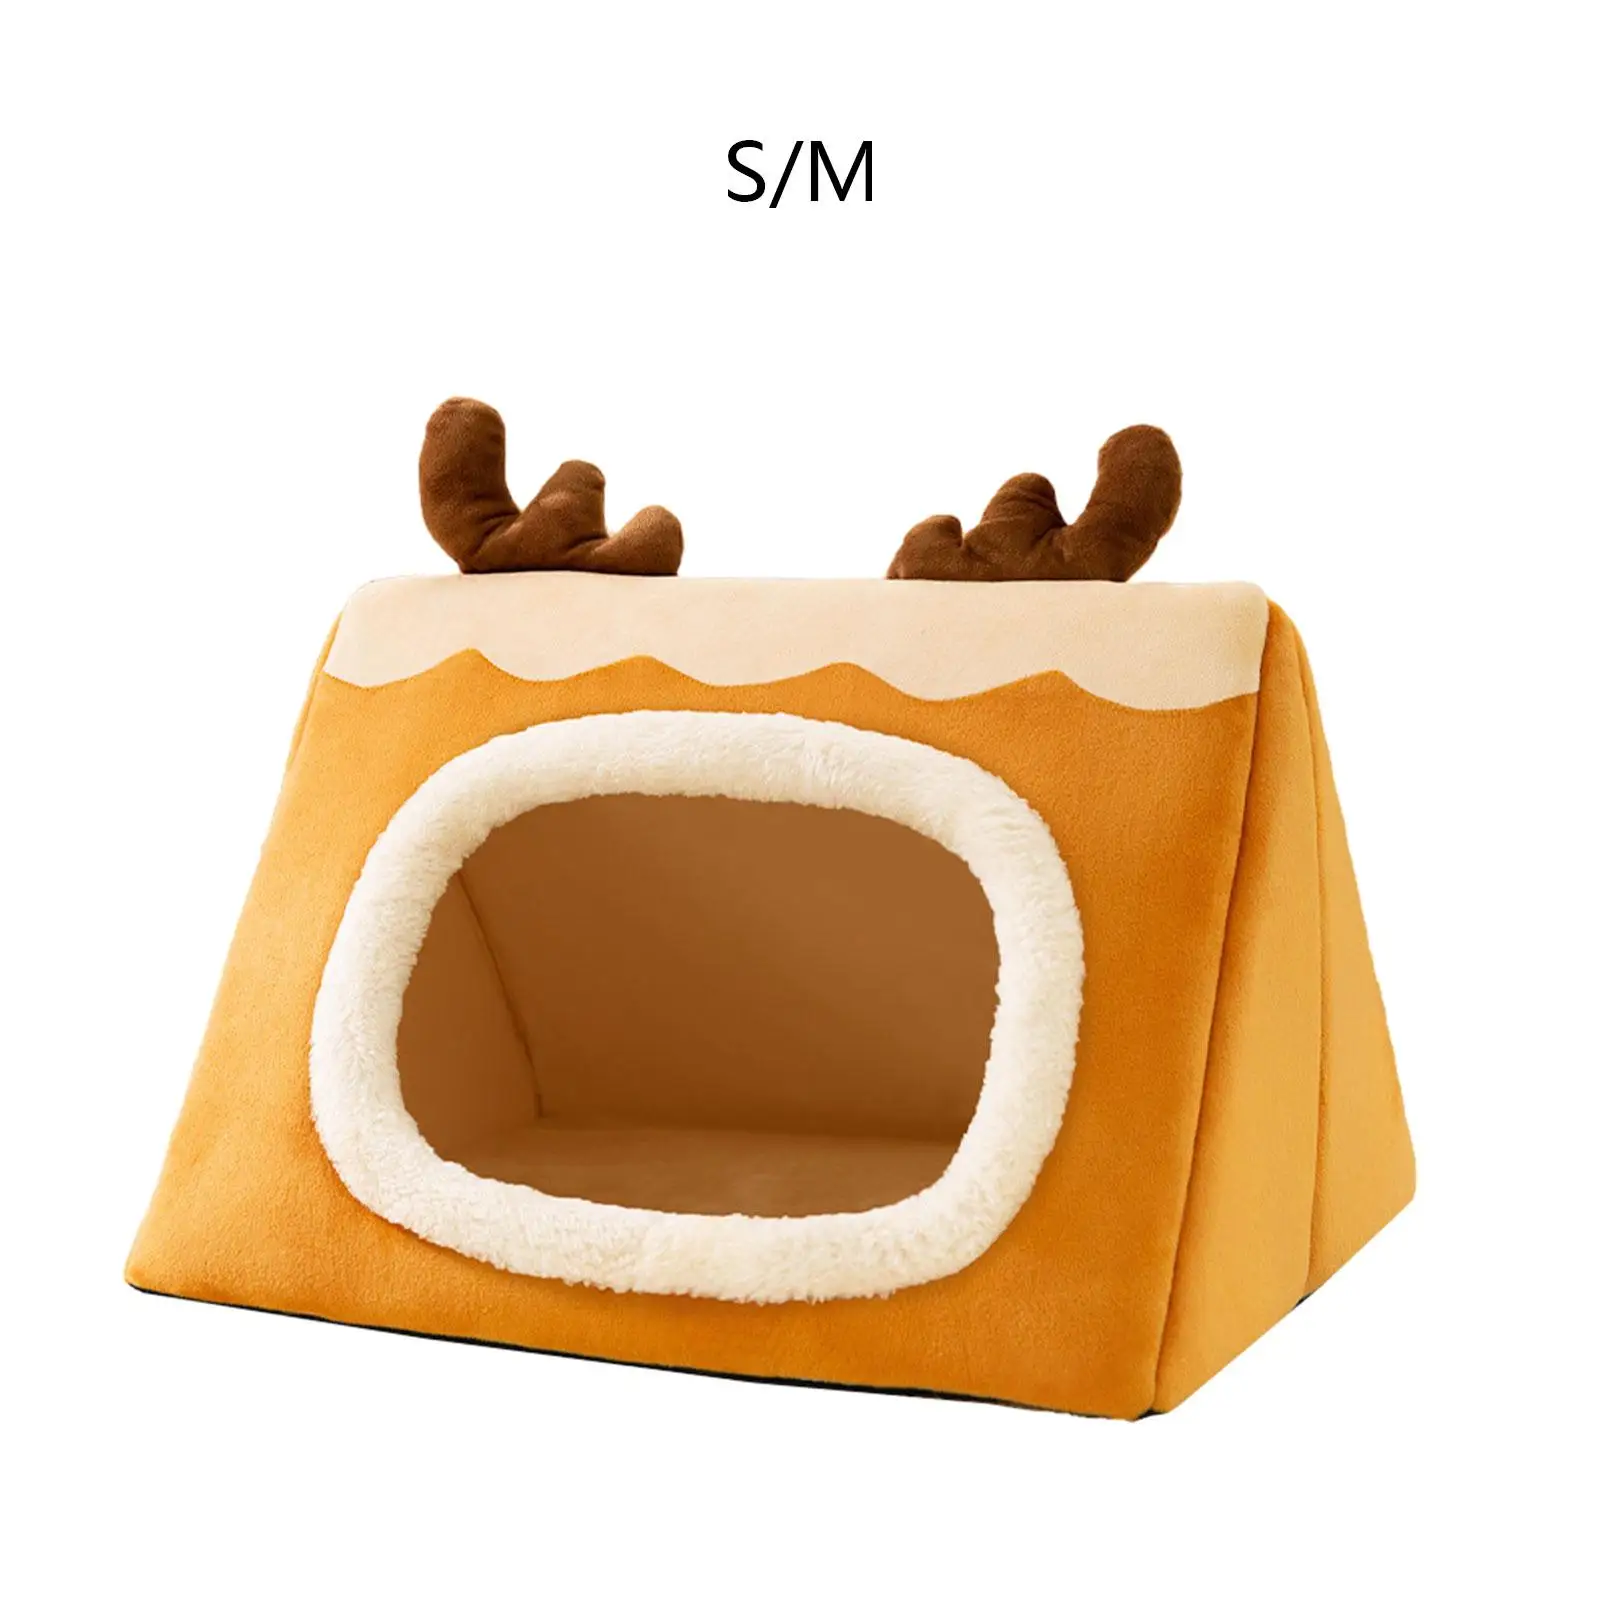 Semi Enclosed Warm Pet House Pet Sleeping Bed for Outdoor Small Animals Home